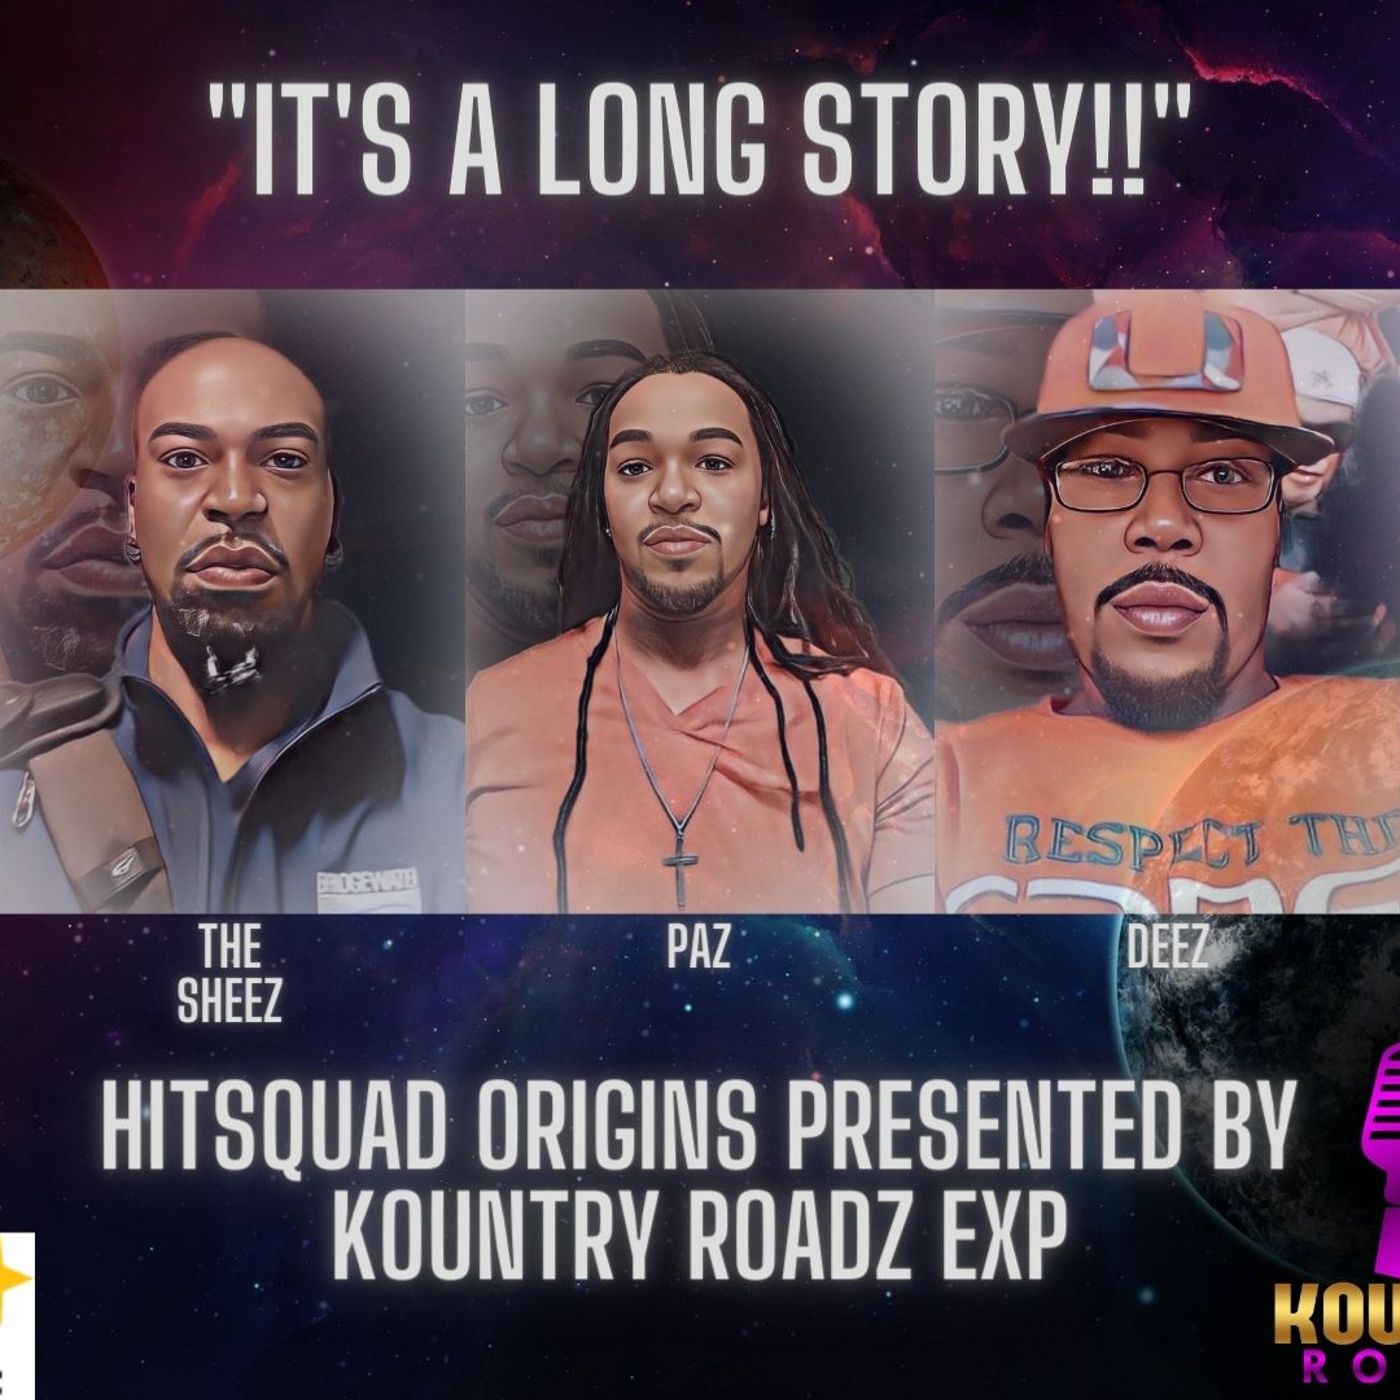 IT'S A LONG STORY: Presented by Kountry Roadz Exp